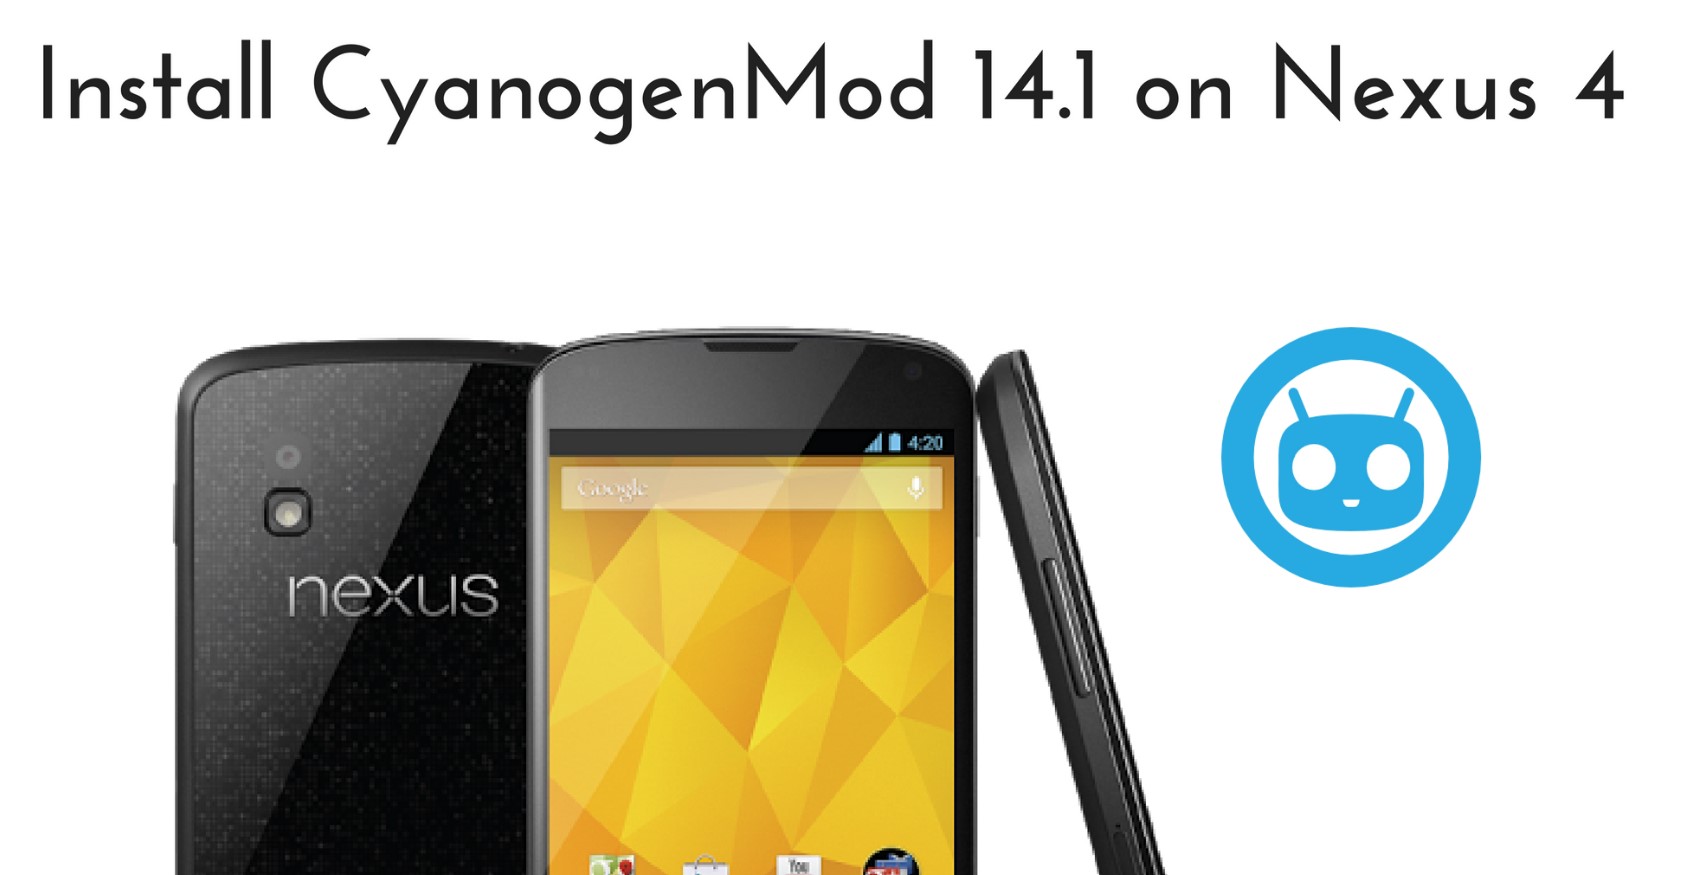 Download and Install CyanogenMod 14.1 on Nexus 4 [Guide]